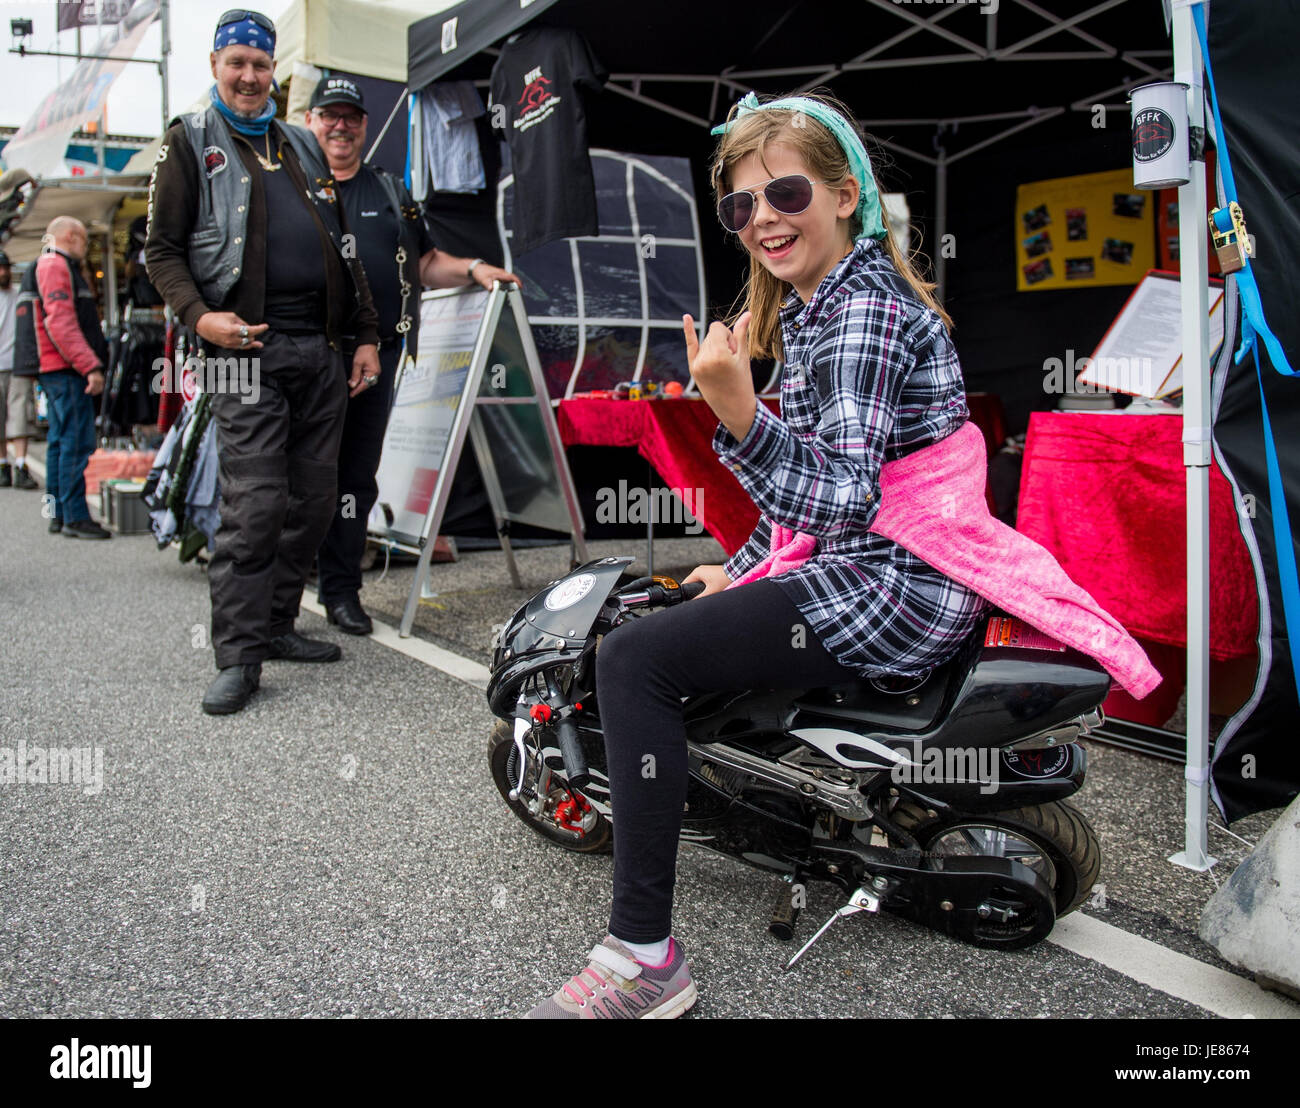 Hamburg, Germany. 26th June, 2017. Visitors of the Harley Days arrive at the festival premises in Hamburg, Germany, 26 June 2017. The Harley Days will take place between the 23rd and the 25th of 2017. Photo: Axel Heimken/dpa/Alamy Live News Stock Photo